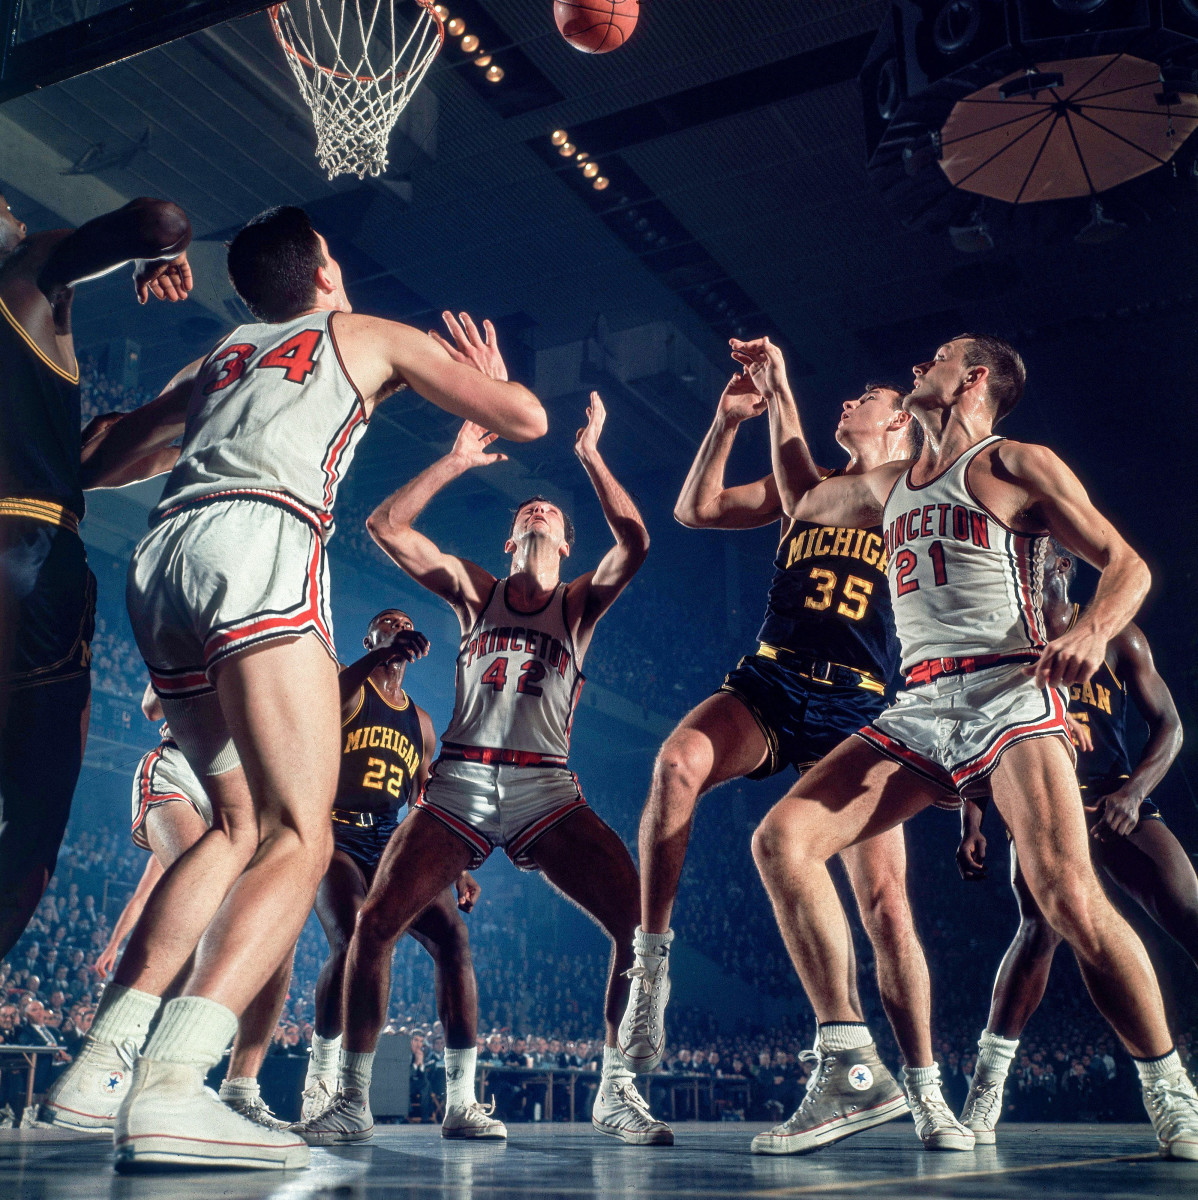 Bradley was elected in part on his sporting resume, which included a Final Four appearance (at Princeton, pictured), two NBA titles and an Olympic gold medal, at the 1964 Tokyo Games.